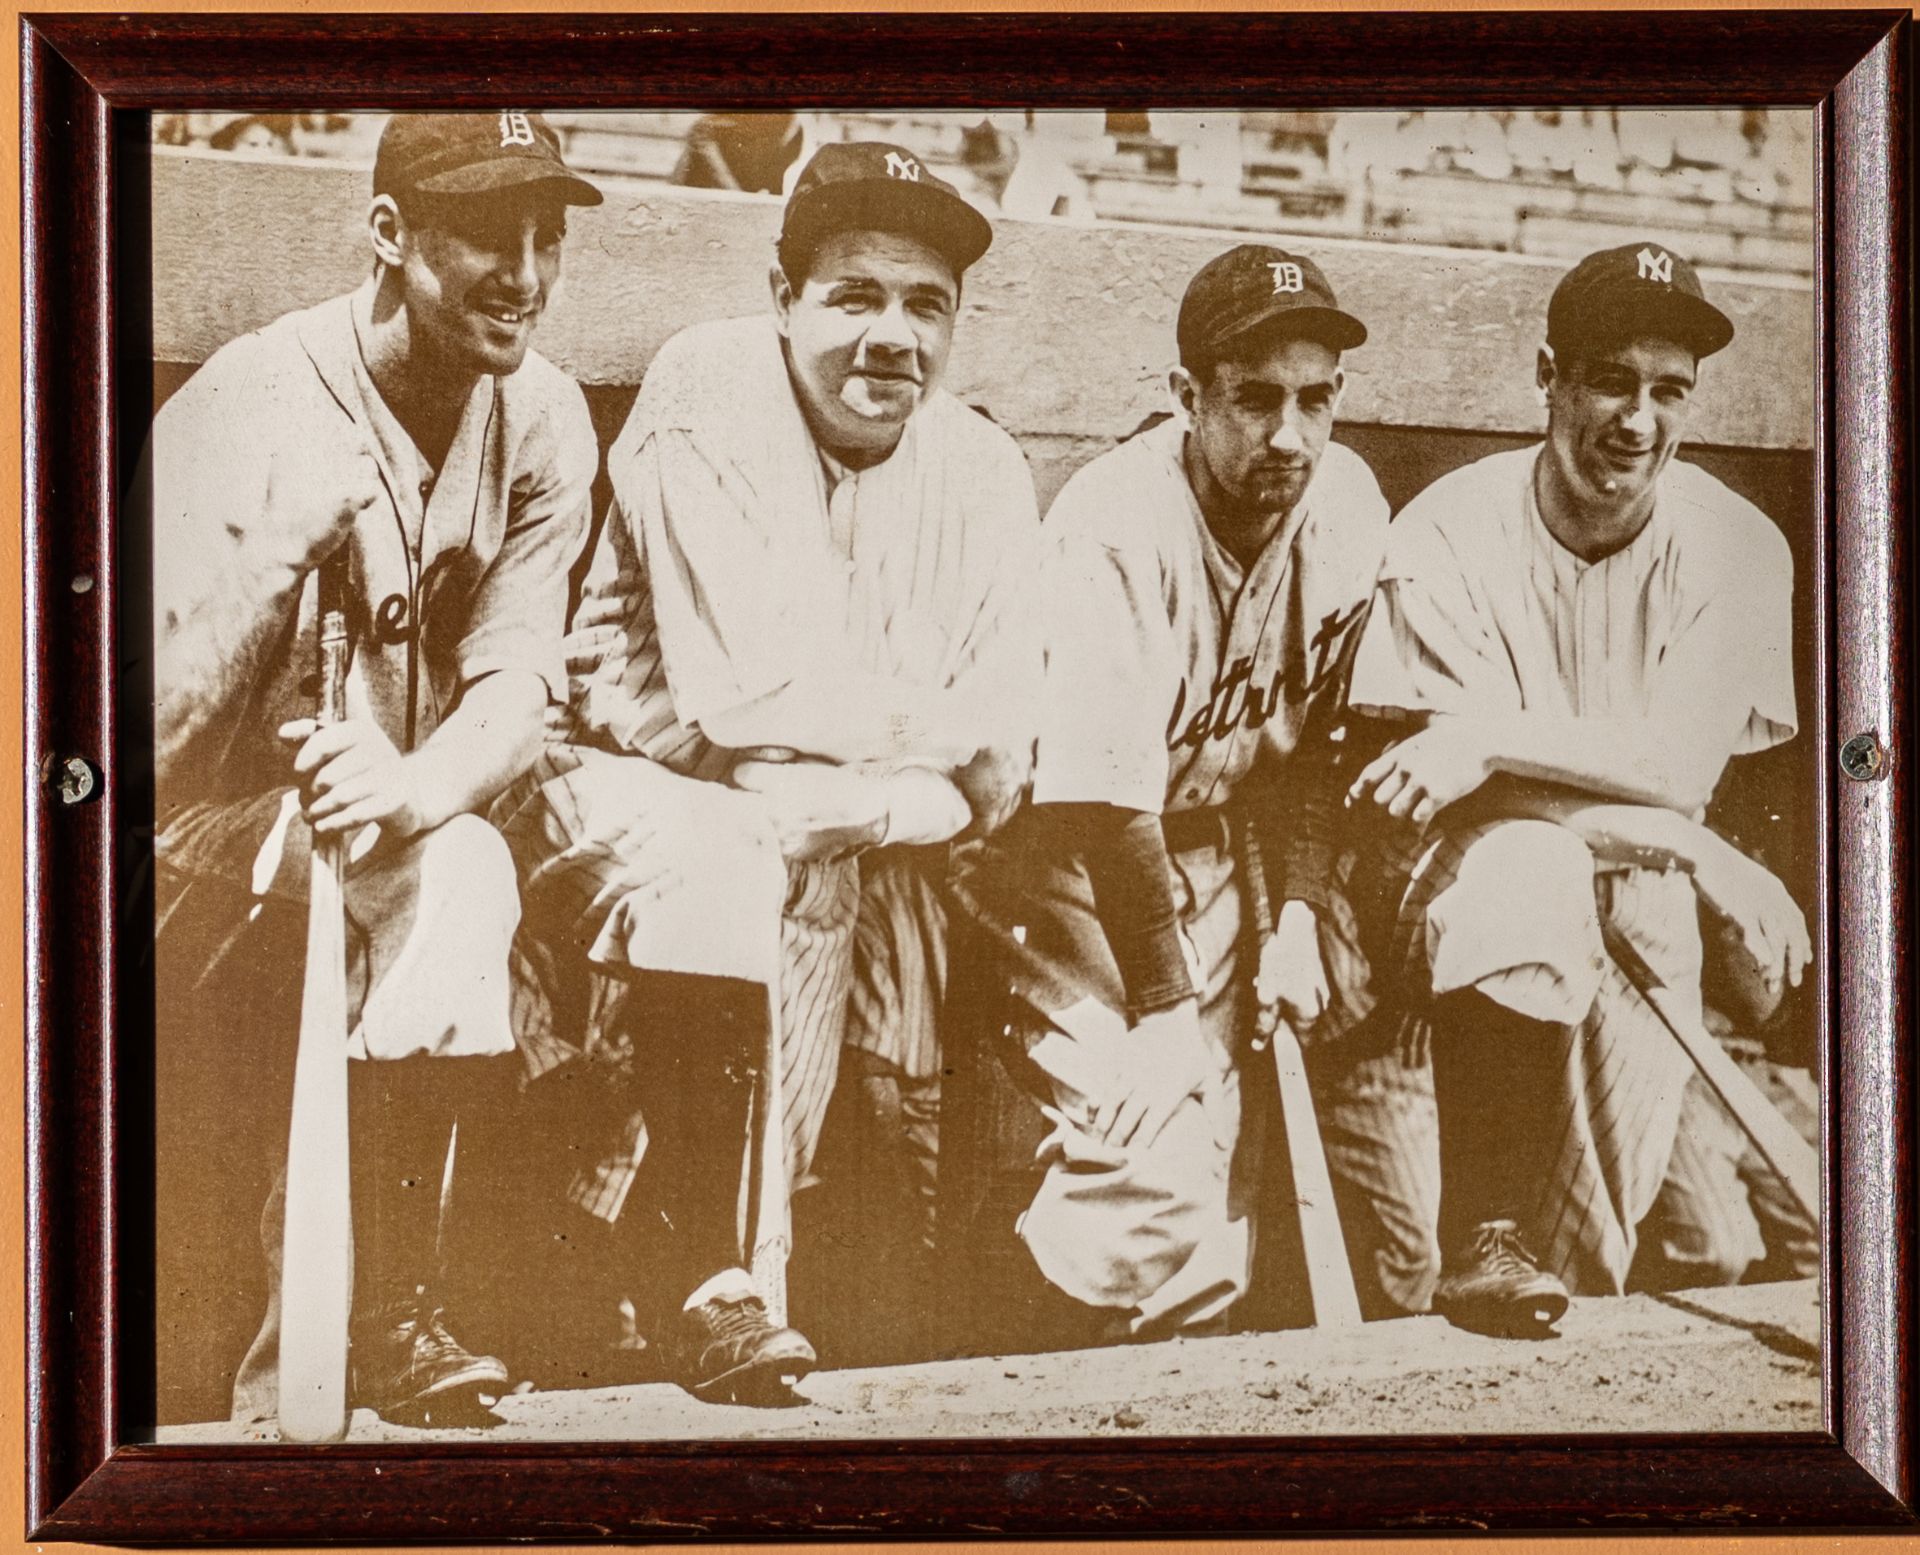 Tigers Vs Yankees Babe Ruth and Others Framed Poster 15"x12"